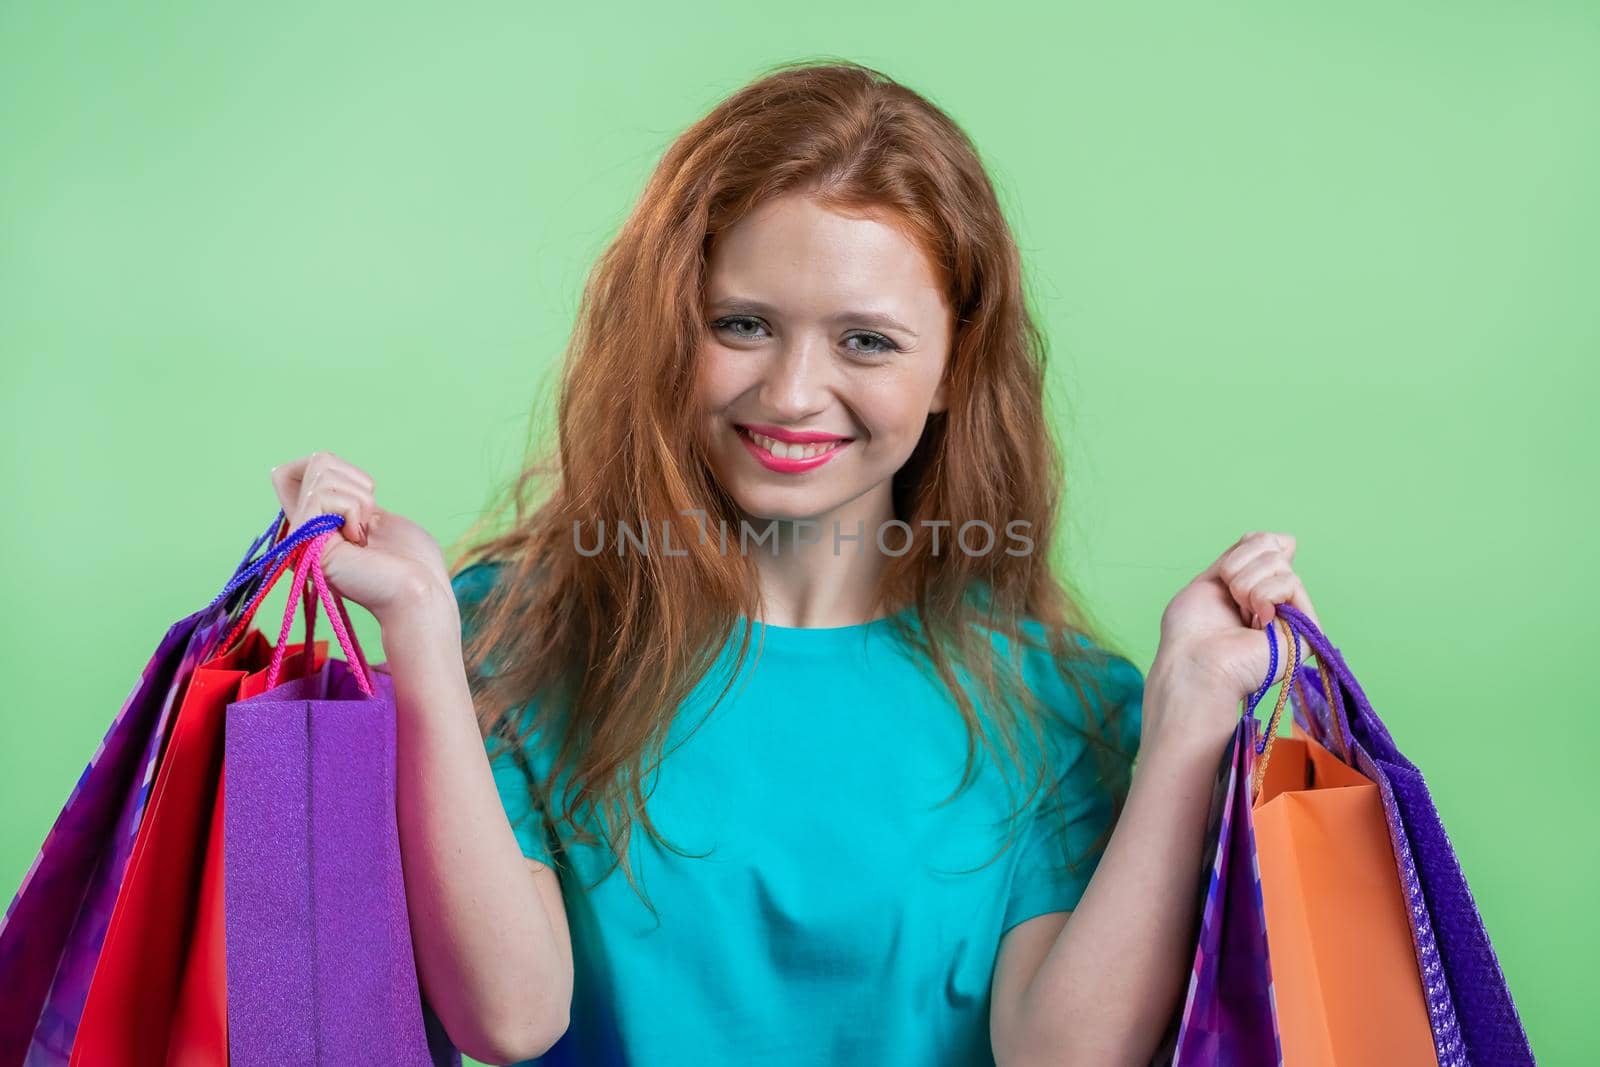 Excited woman with colorful paper bags after shopping on green studio background. Concept of seasonal sale, purchases, spending money on gifts by kristina_kokhanova